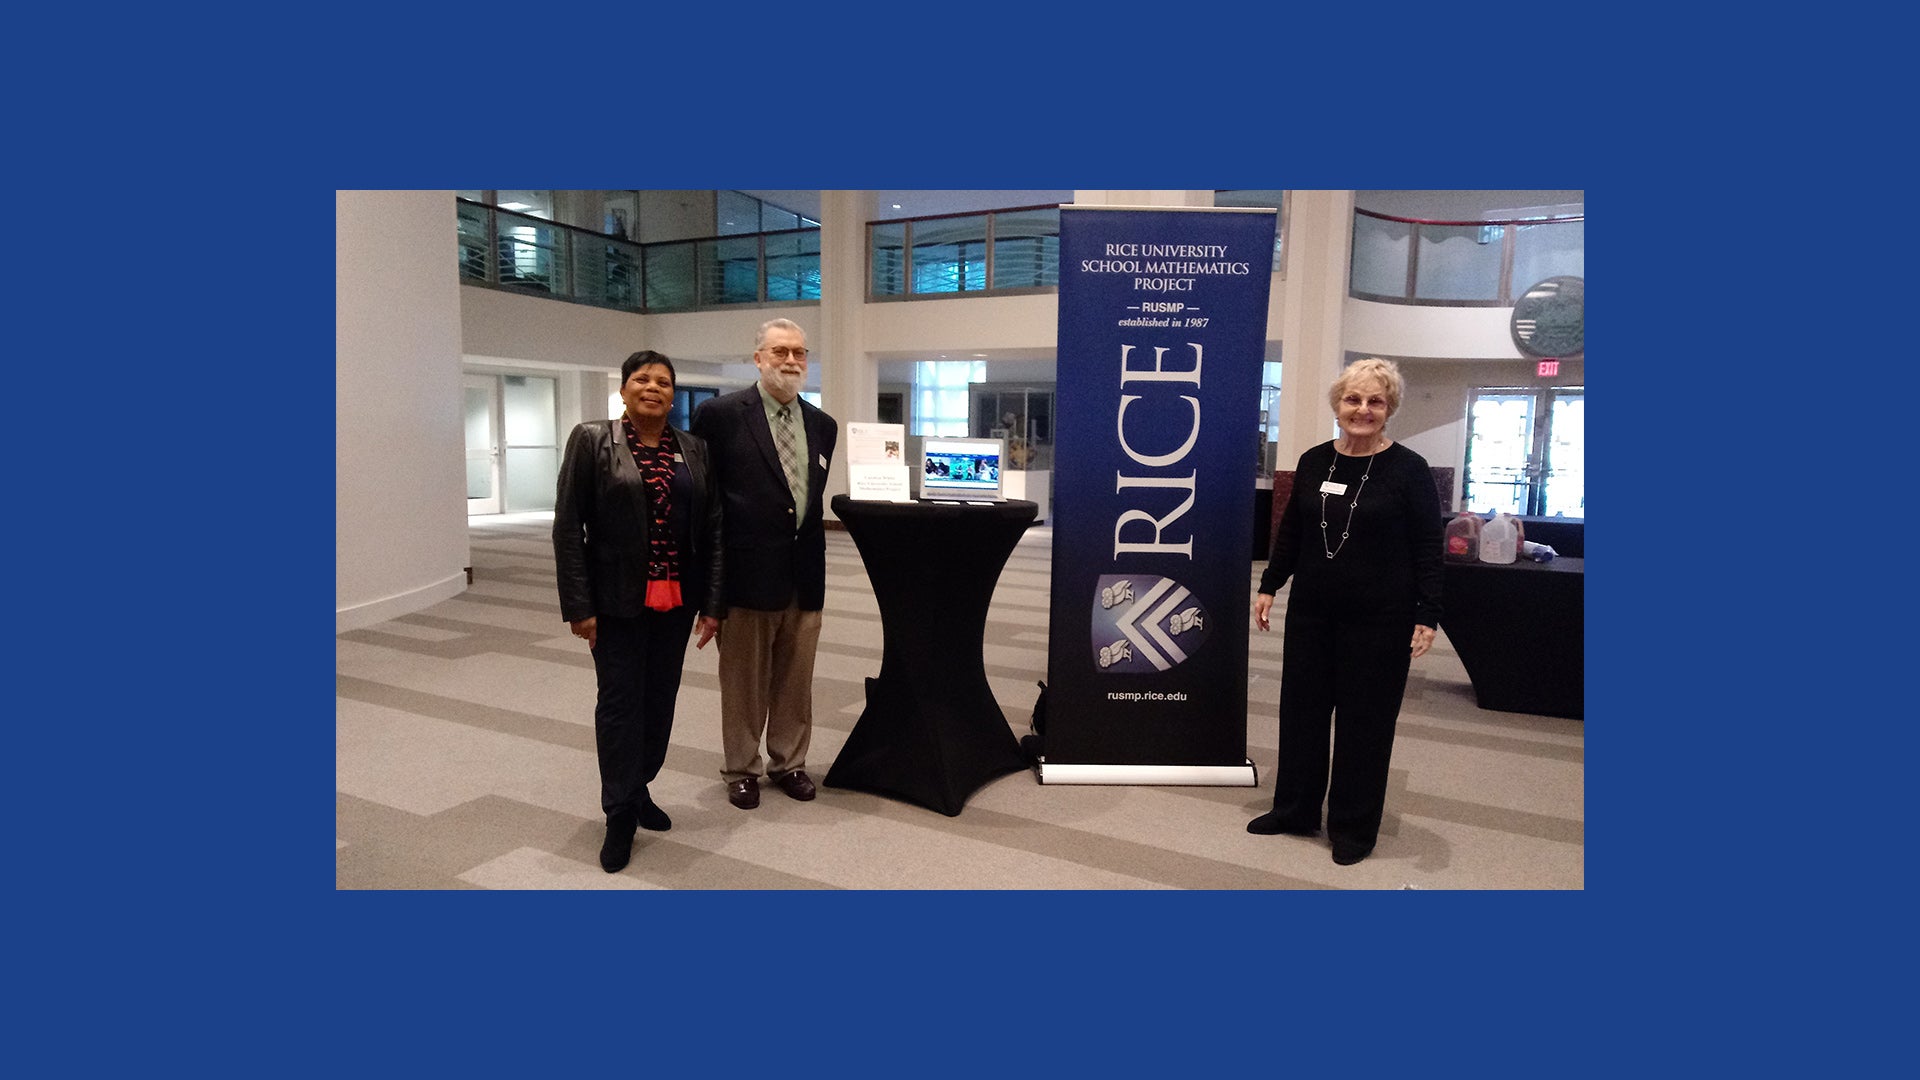 RUSMP showcased at City of Houston Education Subcommittee meeting and reception